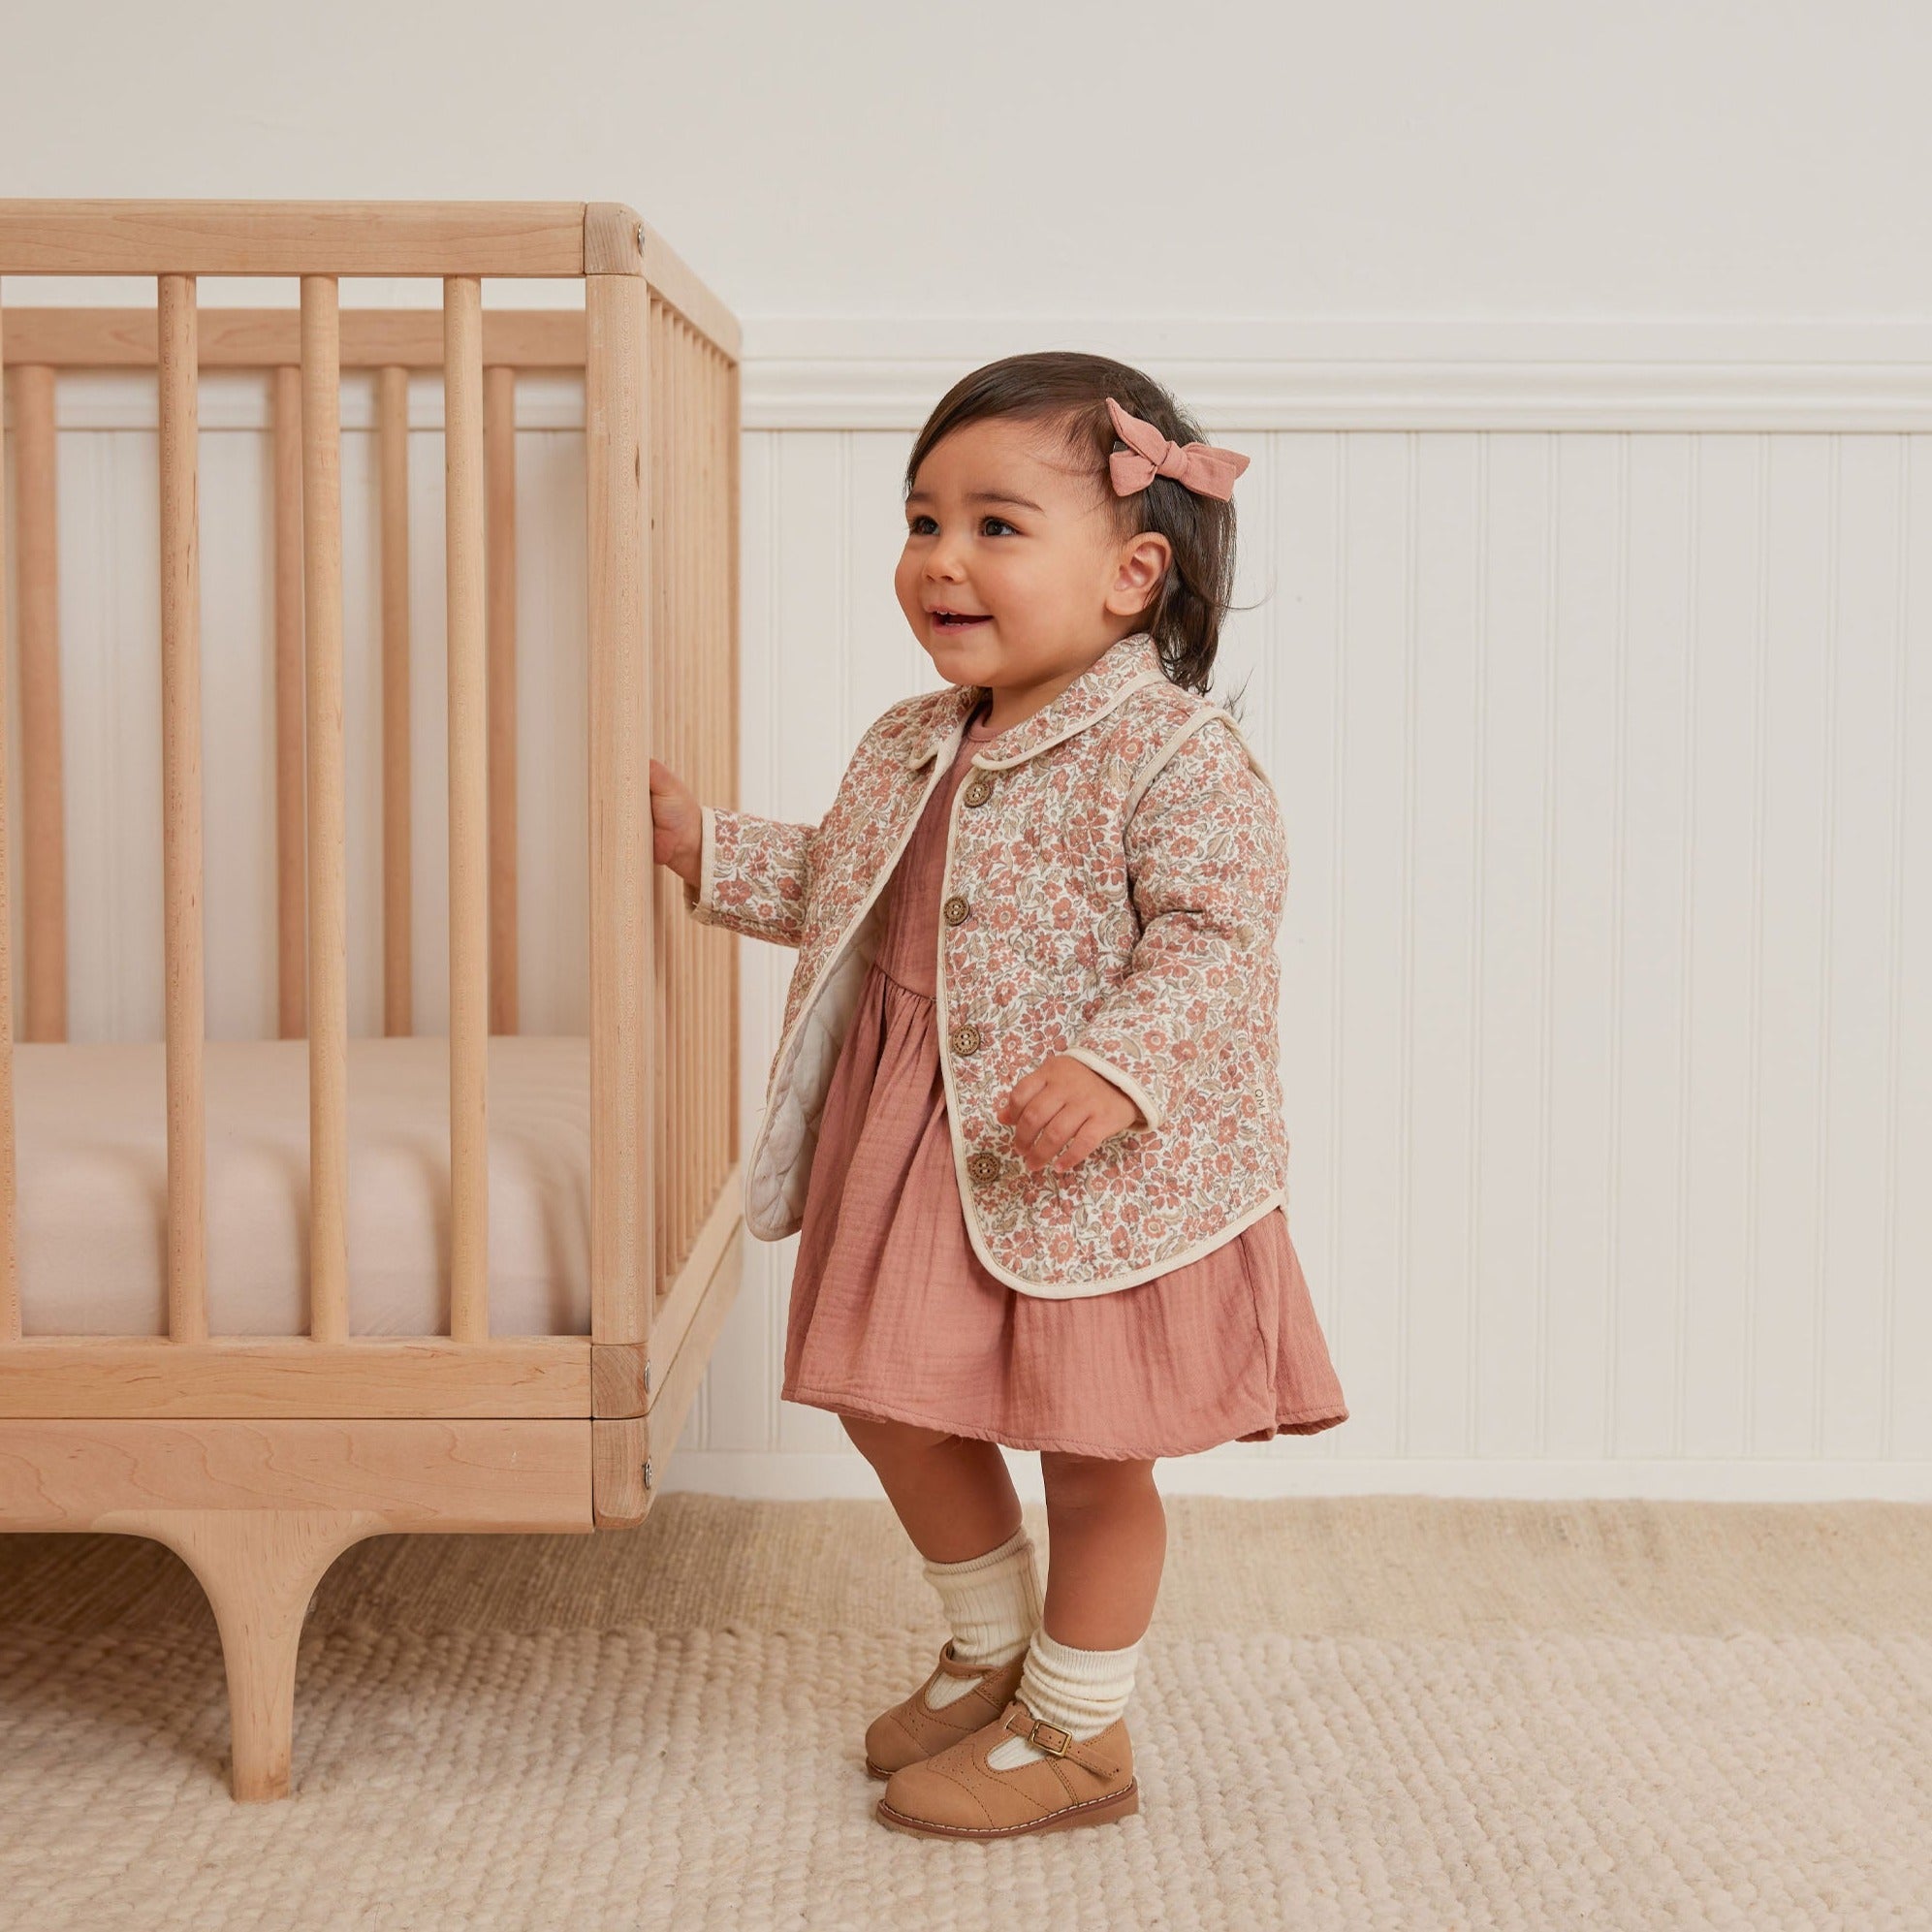 Quilted Jacket | Rose Garden quincy mae baby girl 